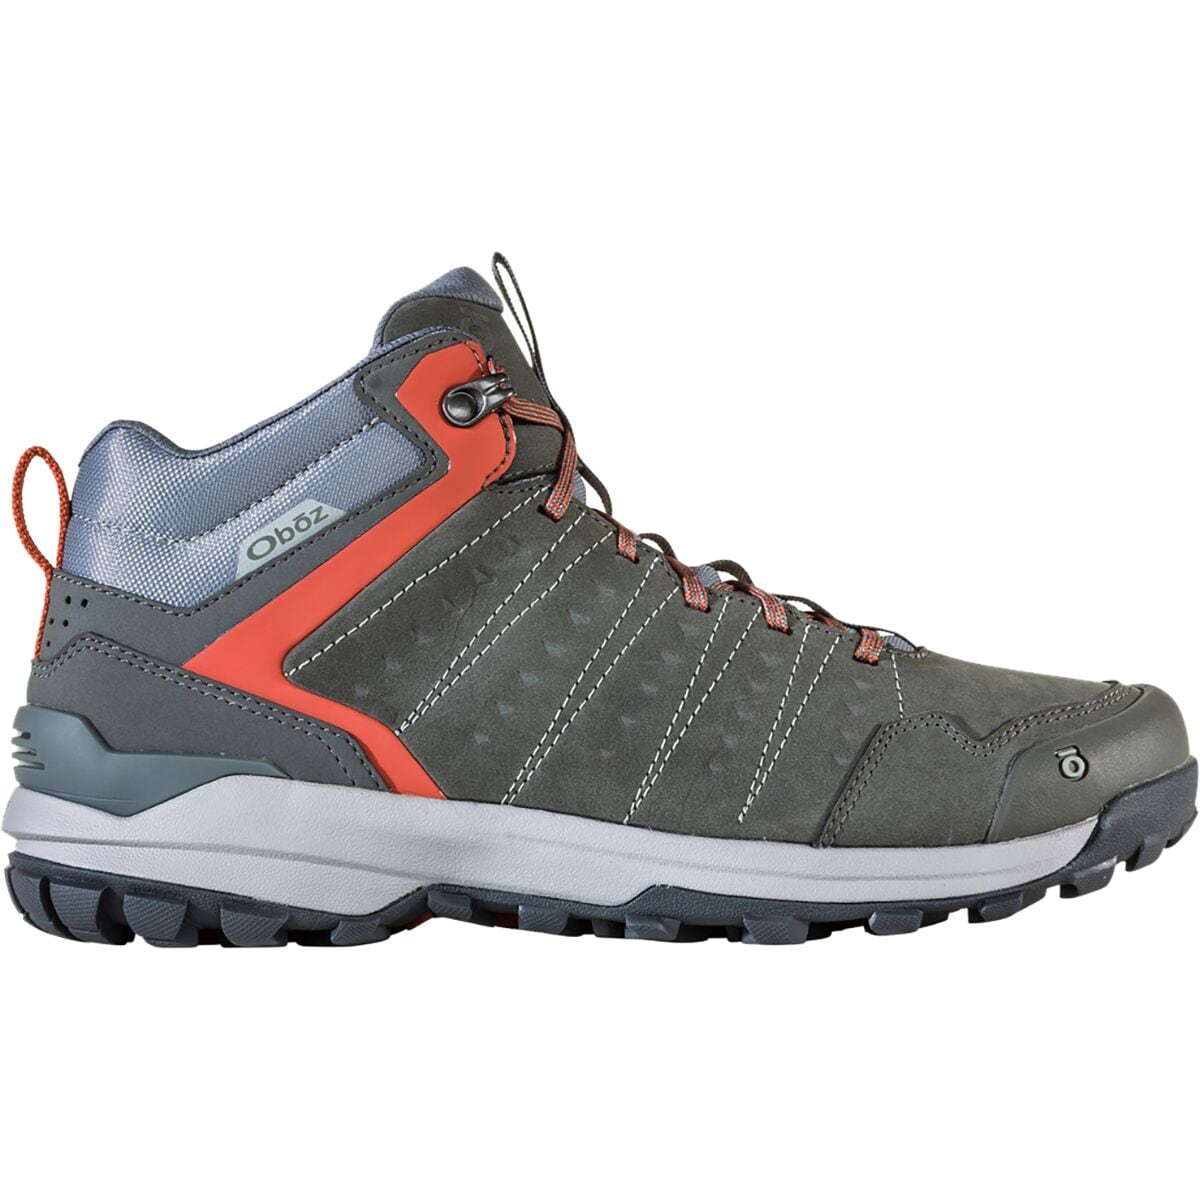 Sypes Mid Leather Waterproof Hiking Boot - Men